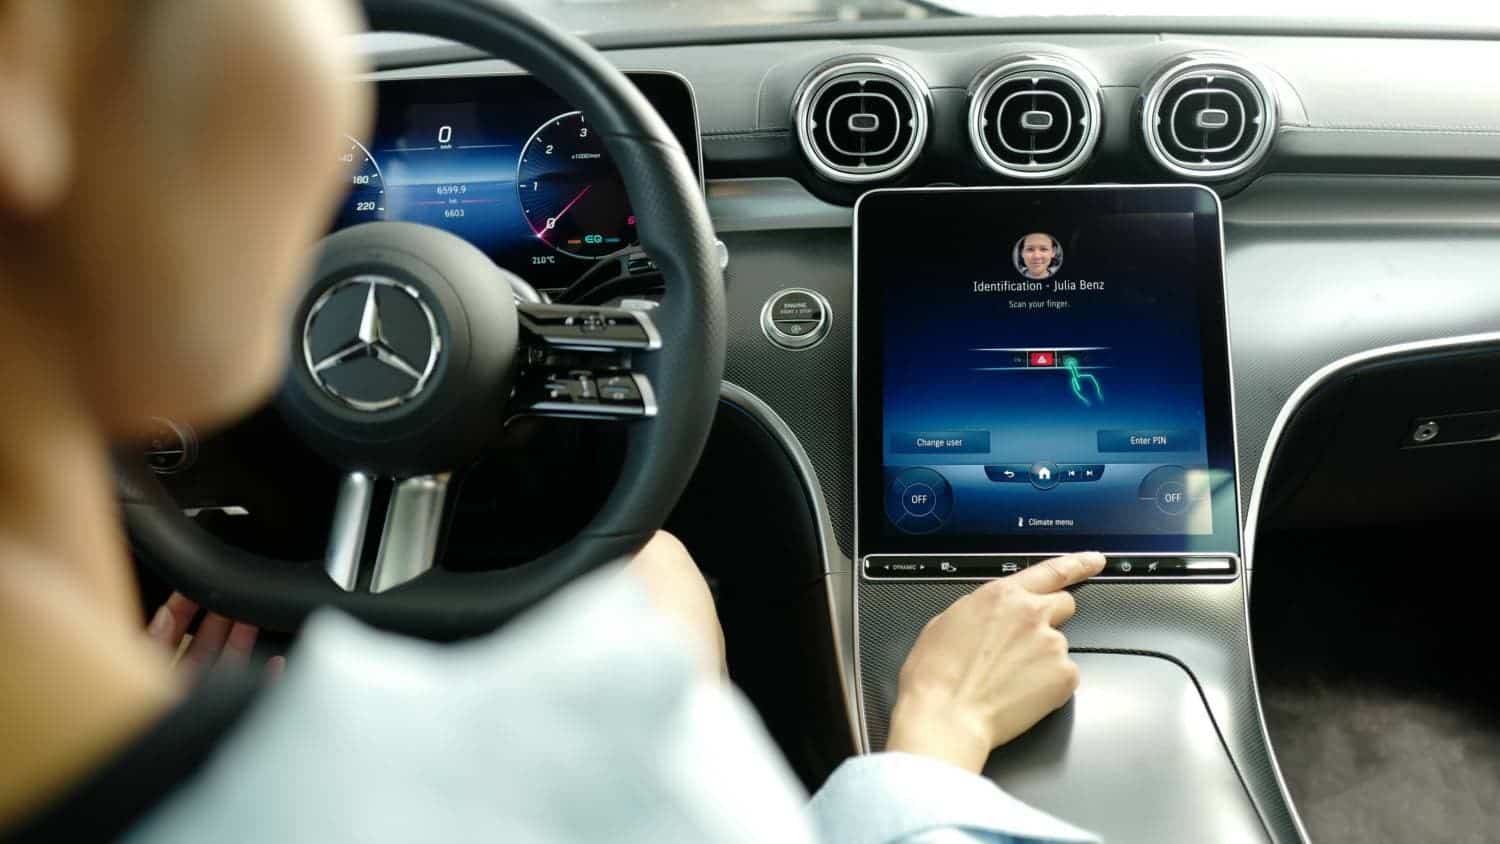 Mercedes Benz In car payment system